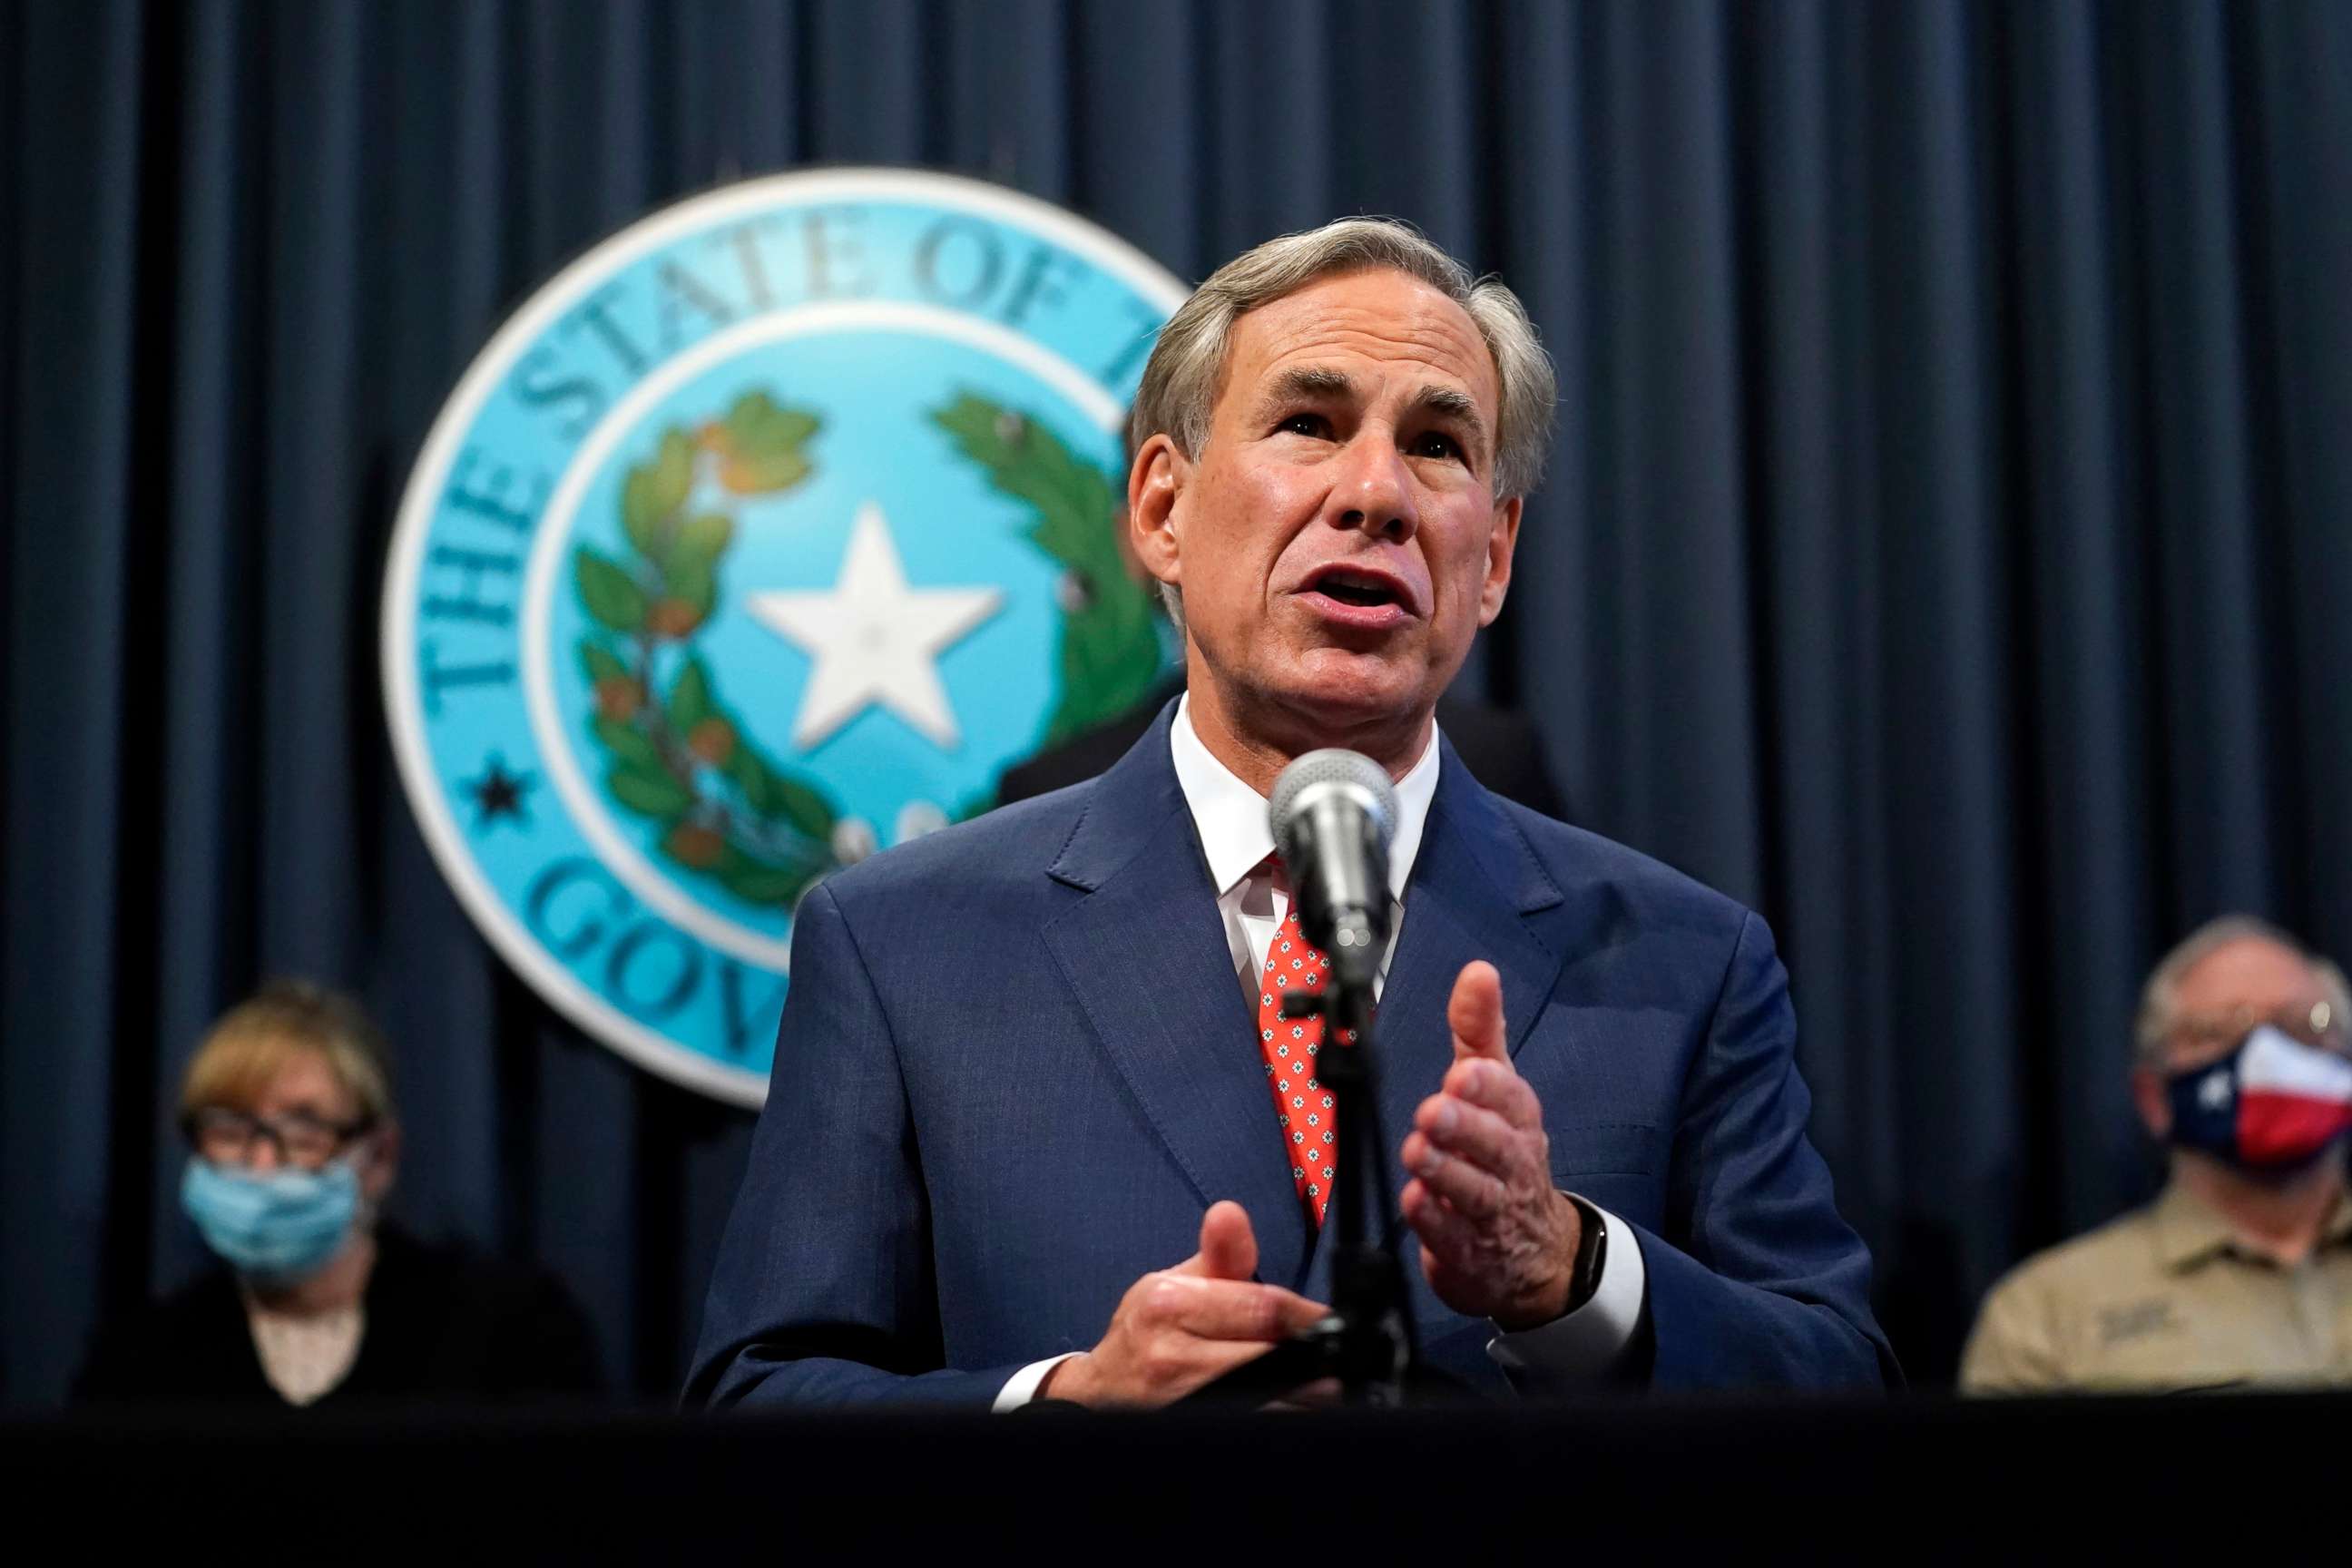 PHOTO: Texas Gov. Greg Abbott speaks during a news conference where he provided an update to Texas' response to COVID-19, Sept. 17, 2020, in Austin, Texas.